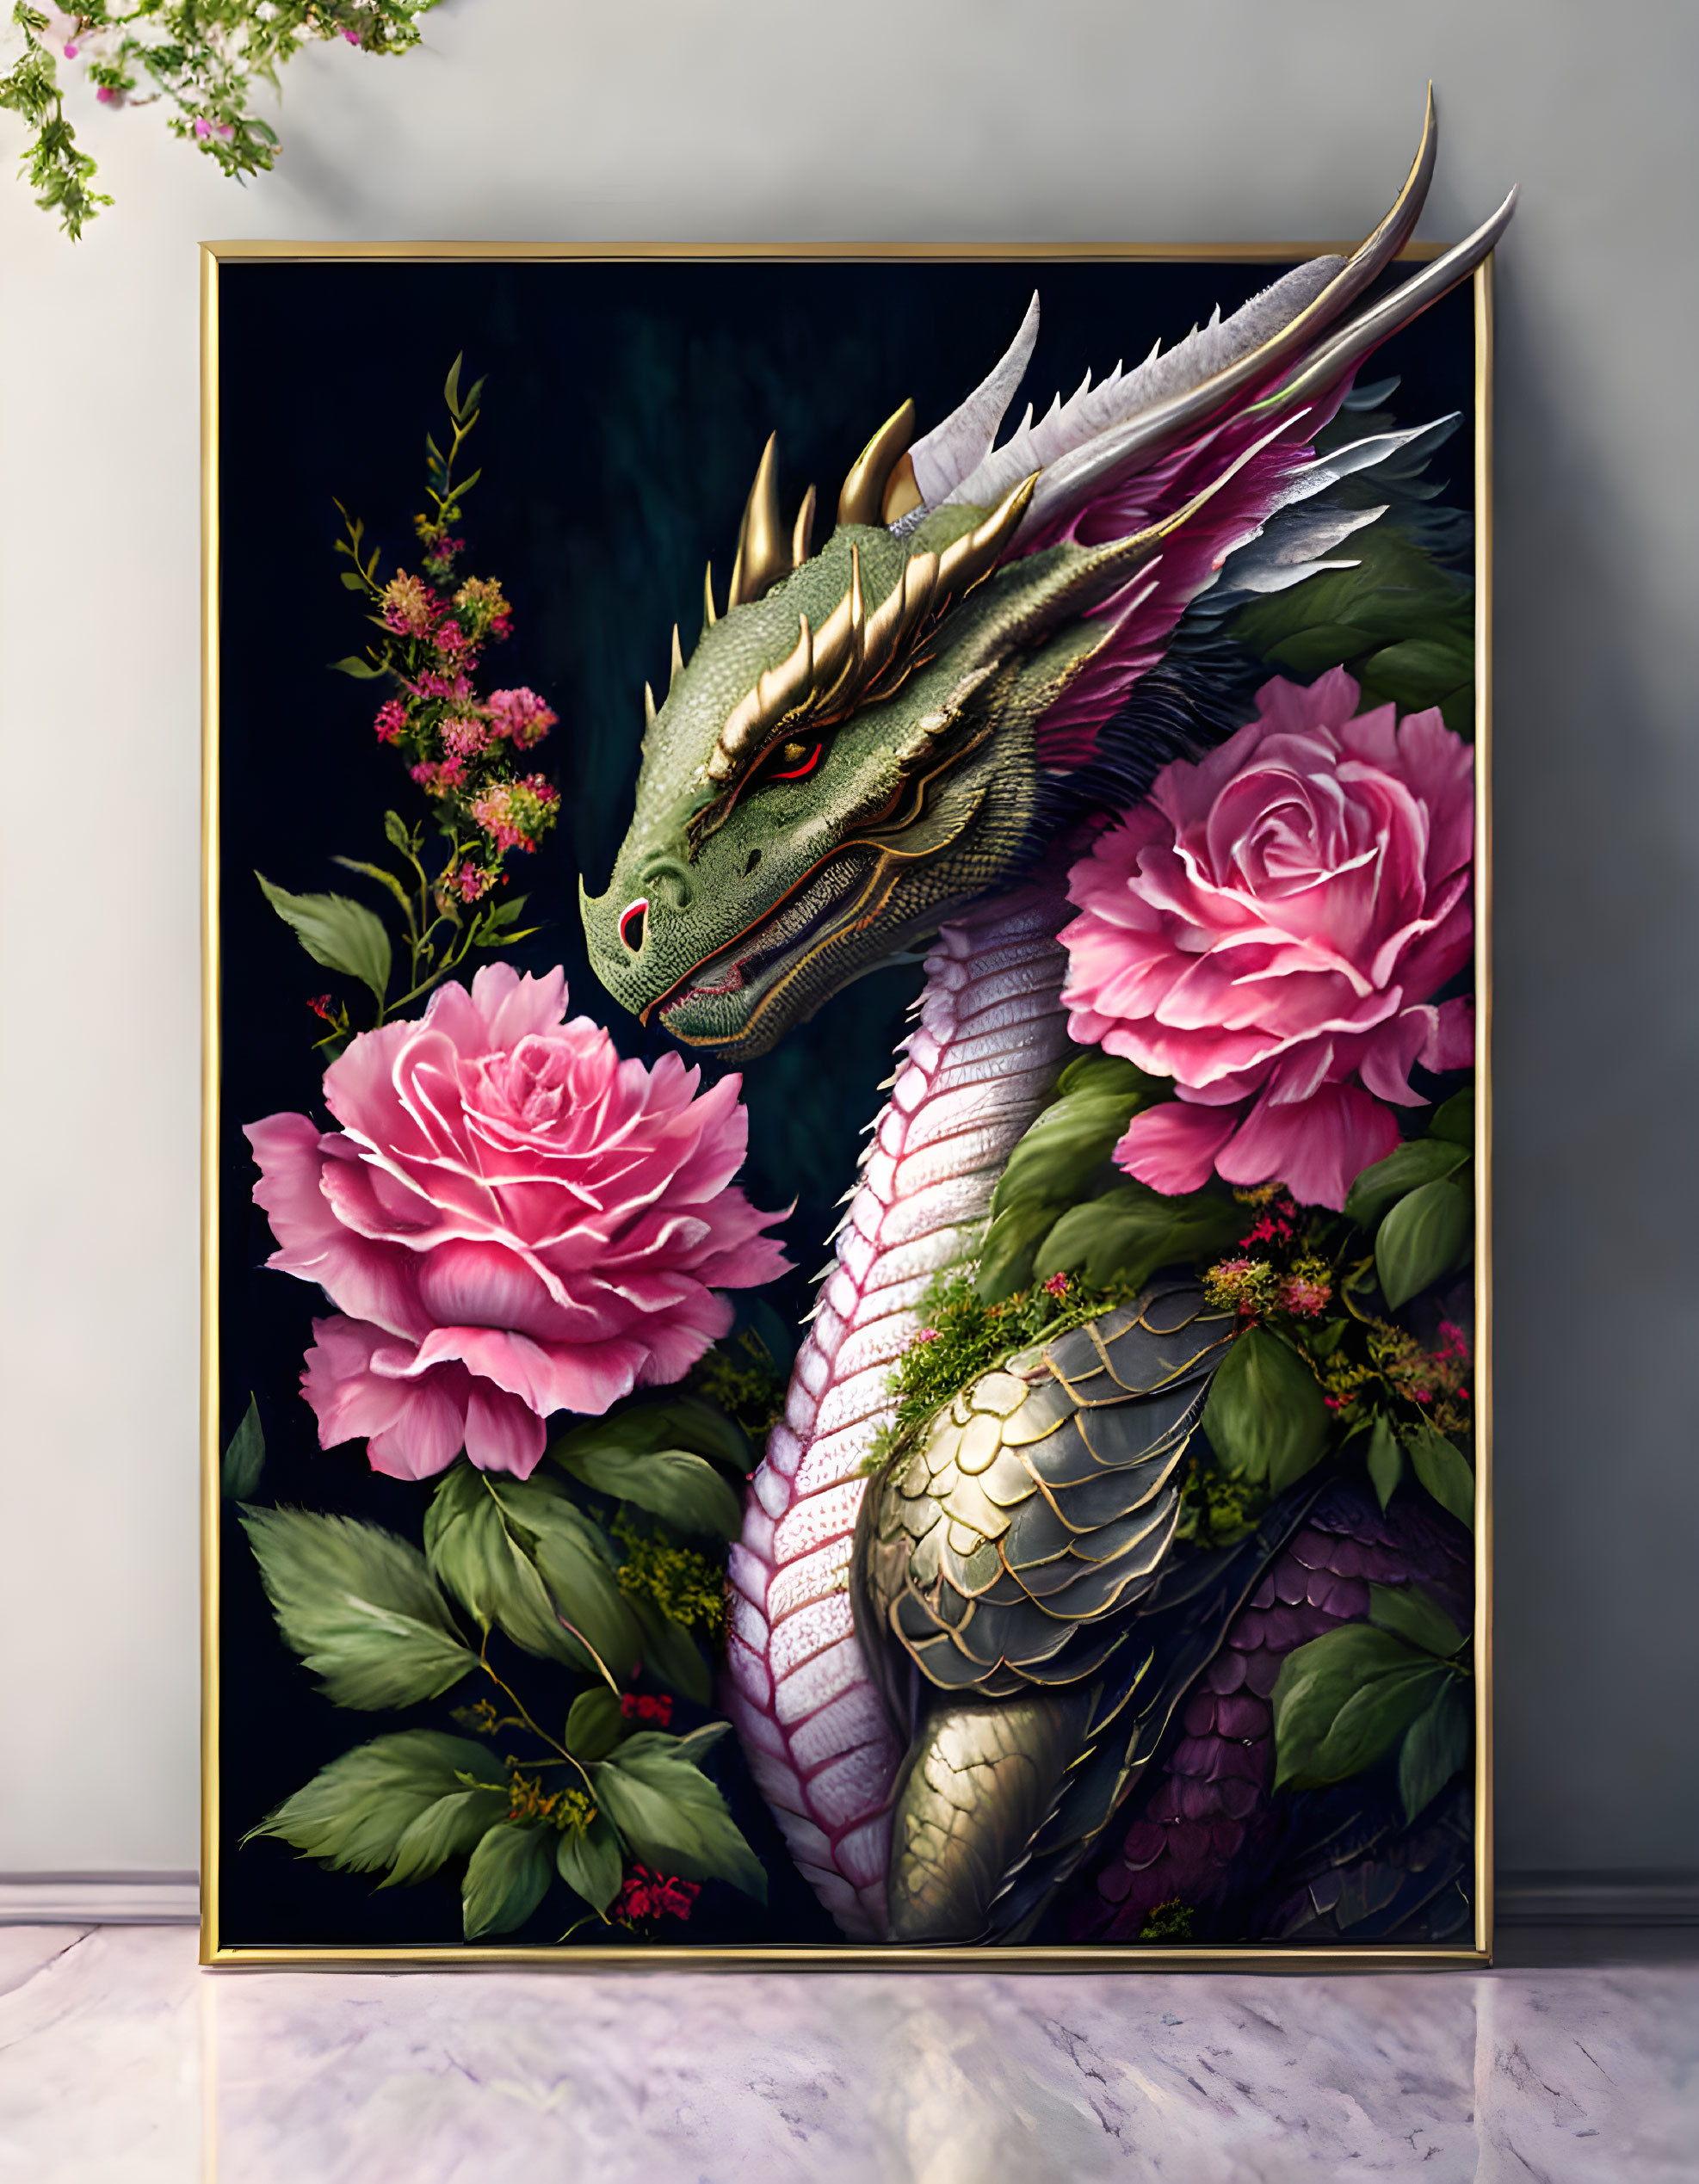  Young dragon with wild roses